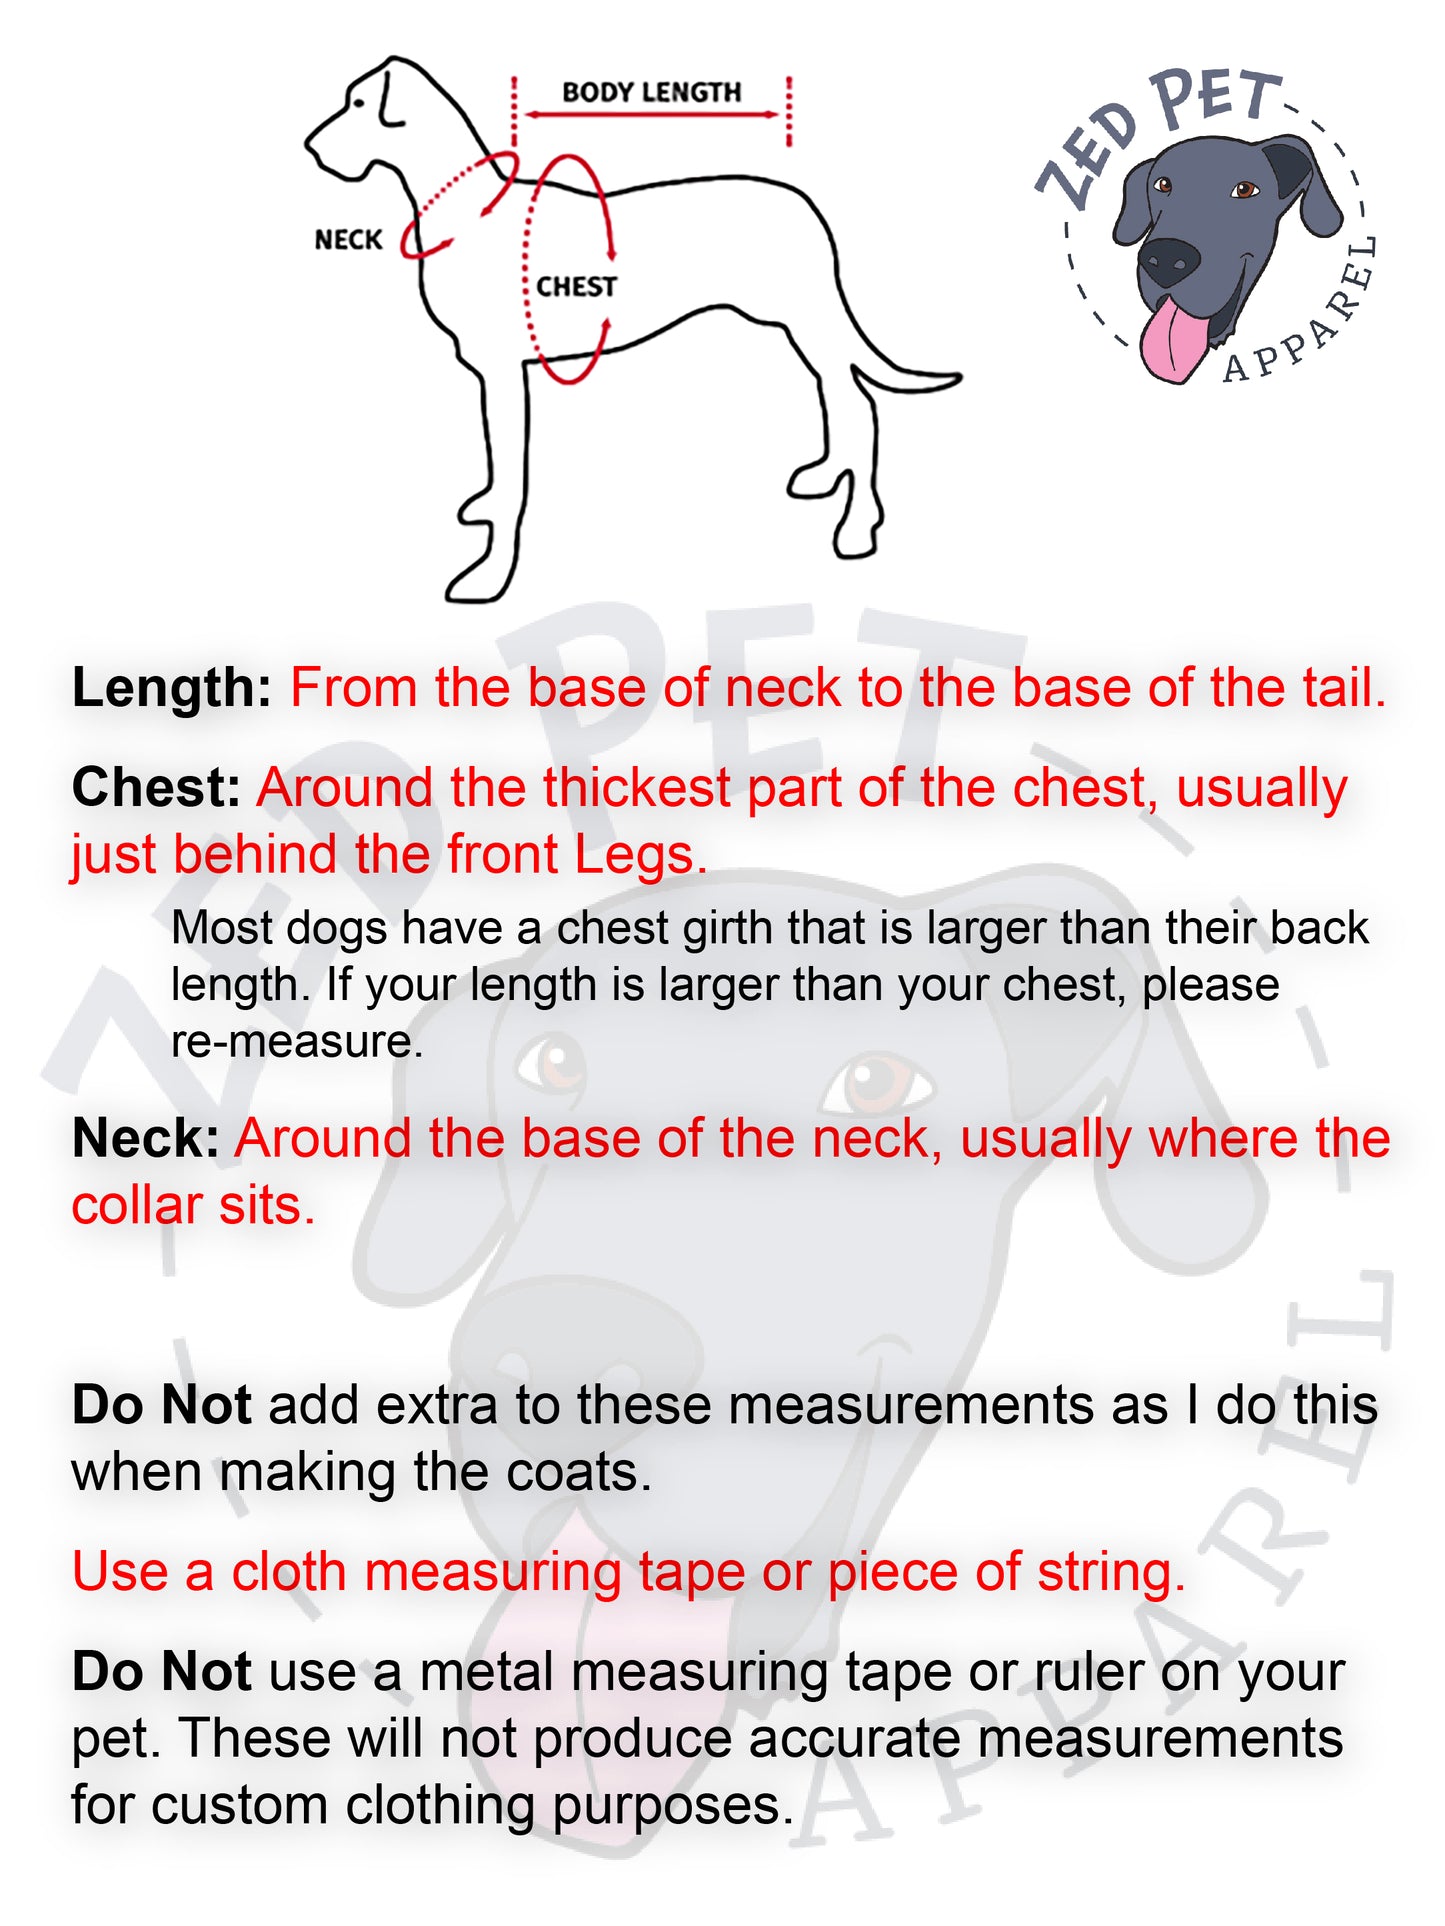 Guide for measuring your dog with text and pictures